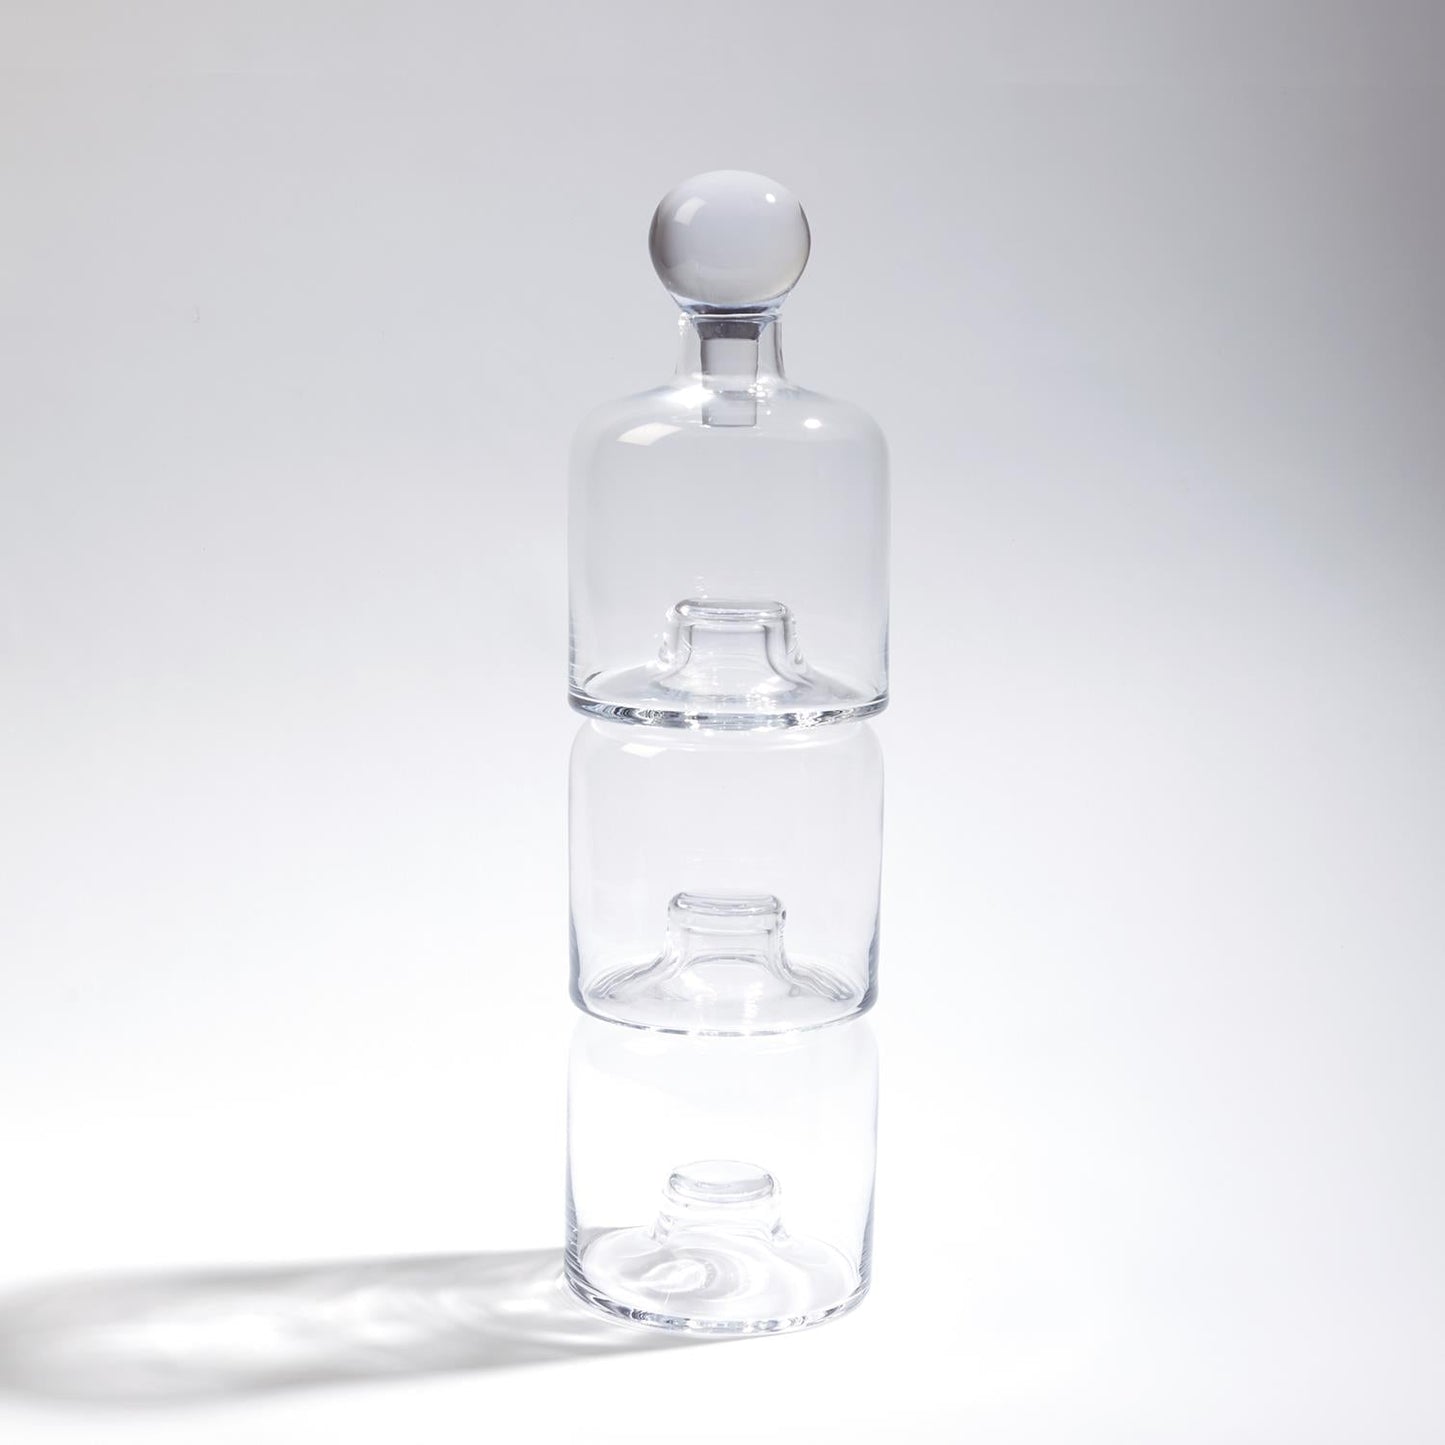 Stacking Decanters